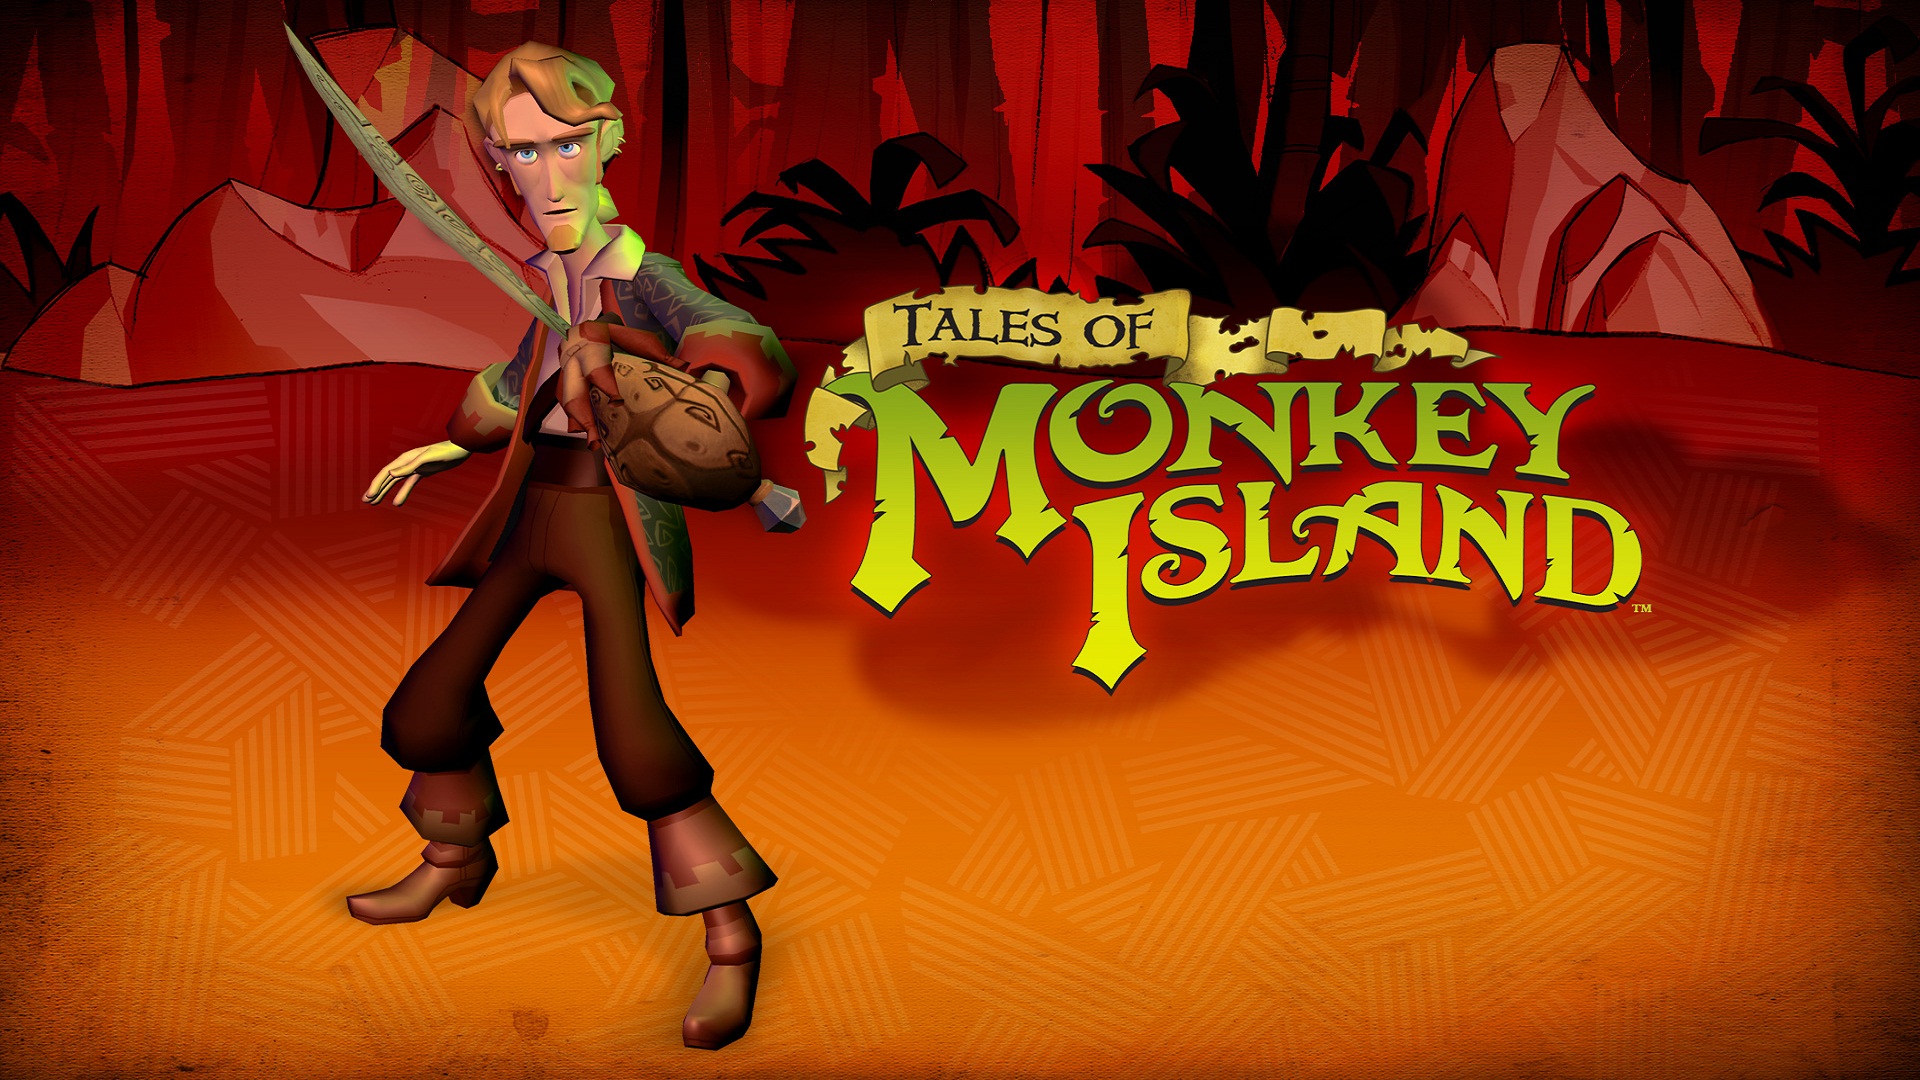 video game, tales of monkey island